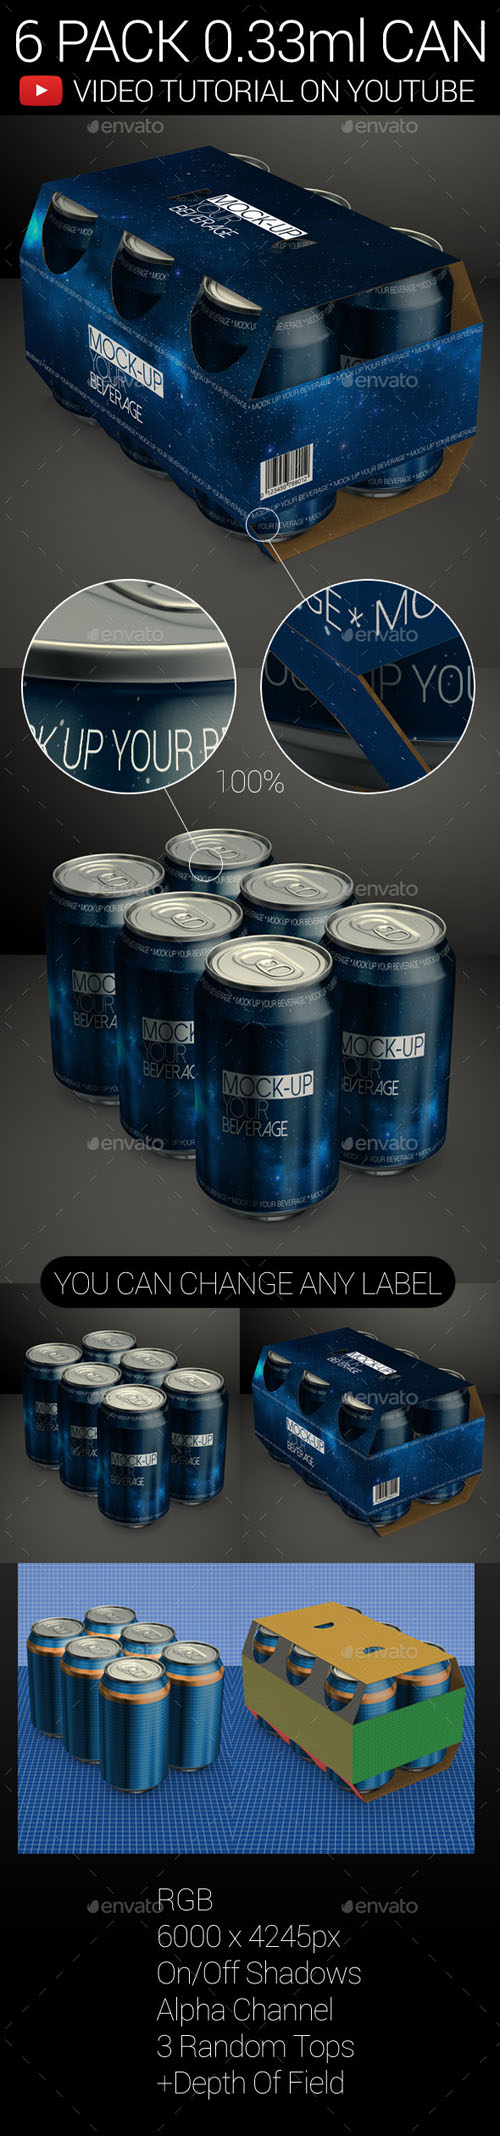 06 Pack 0.33ml Can 01 - Graphicriver 9322575